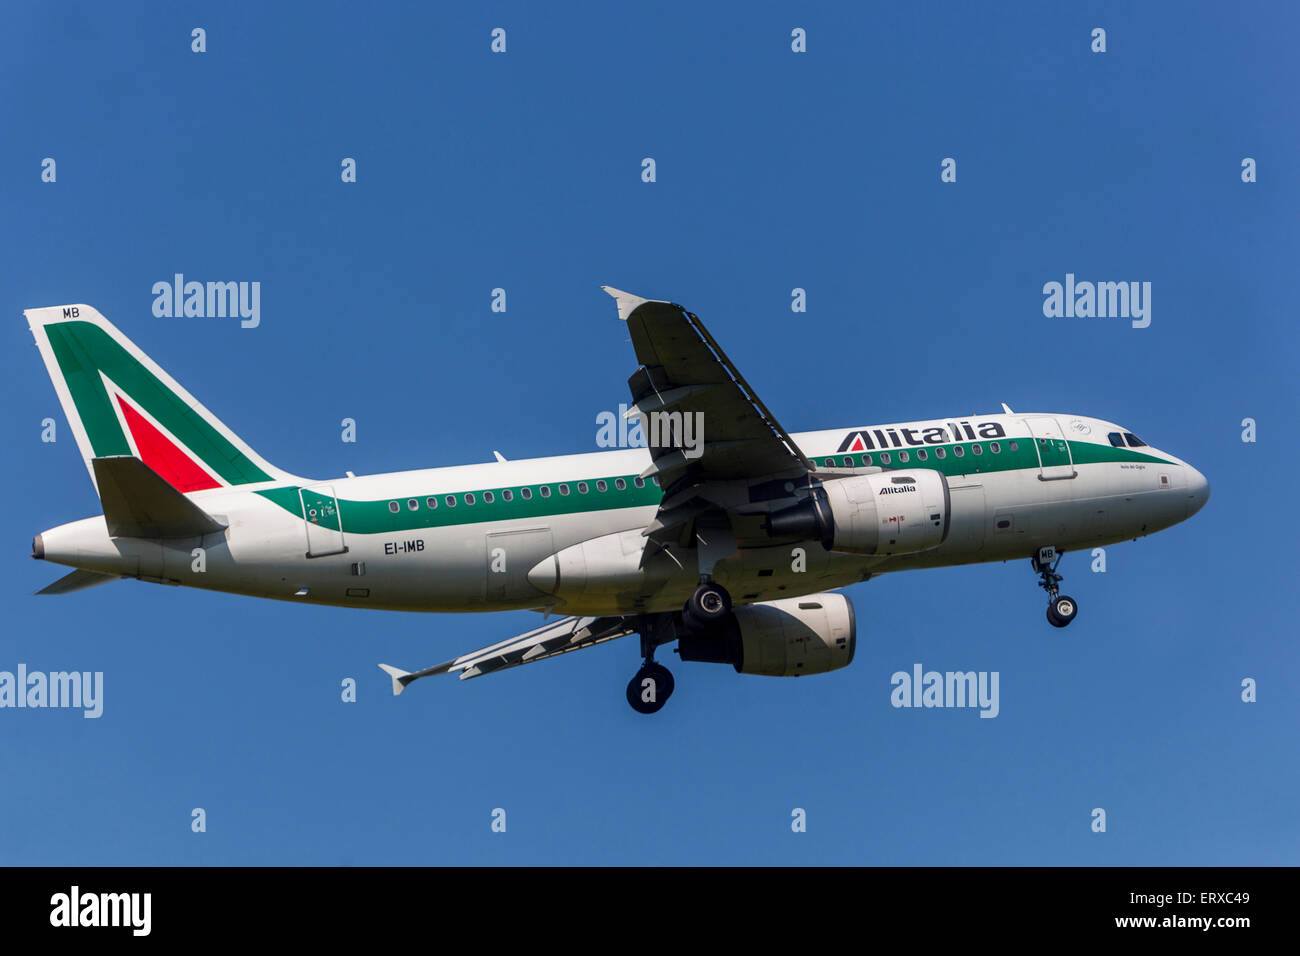 Airbus A319 operated by Alitalia on approach for landing Prague, Czech Republic Stock Photo